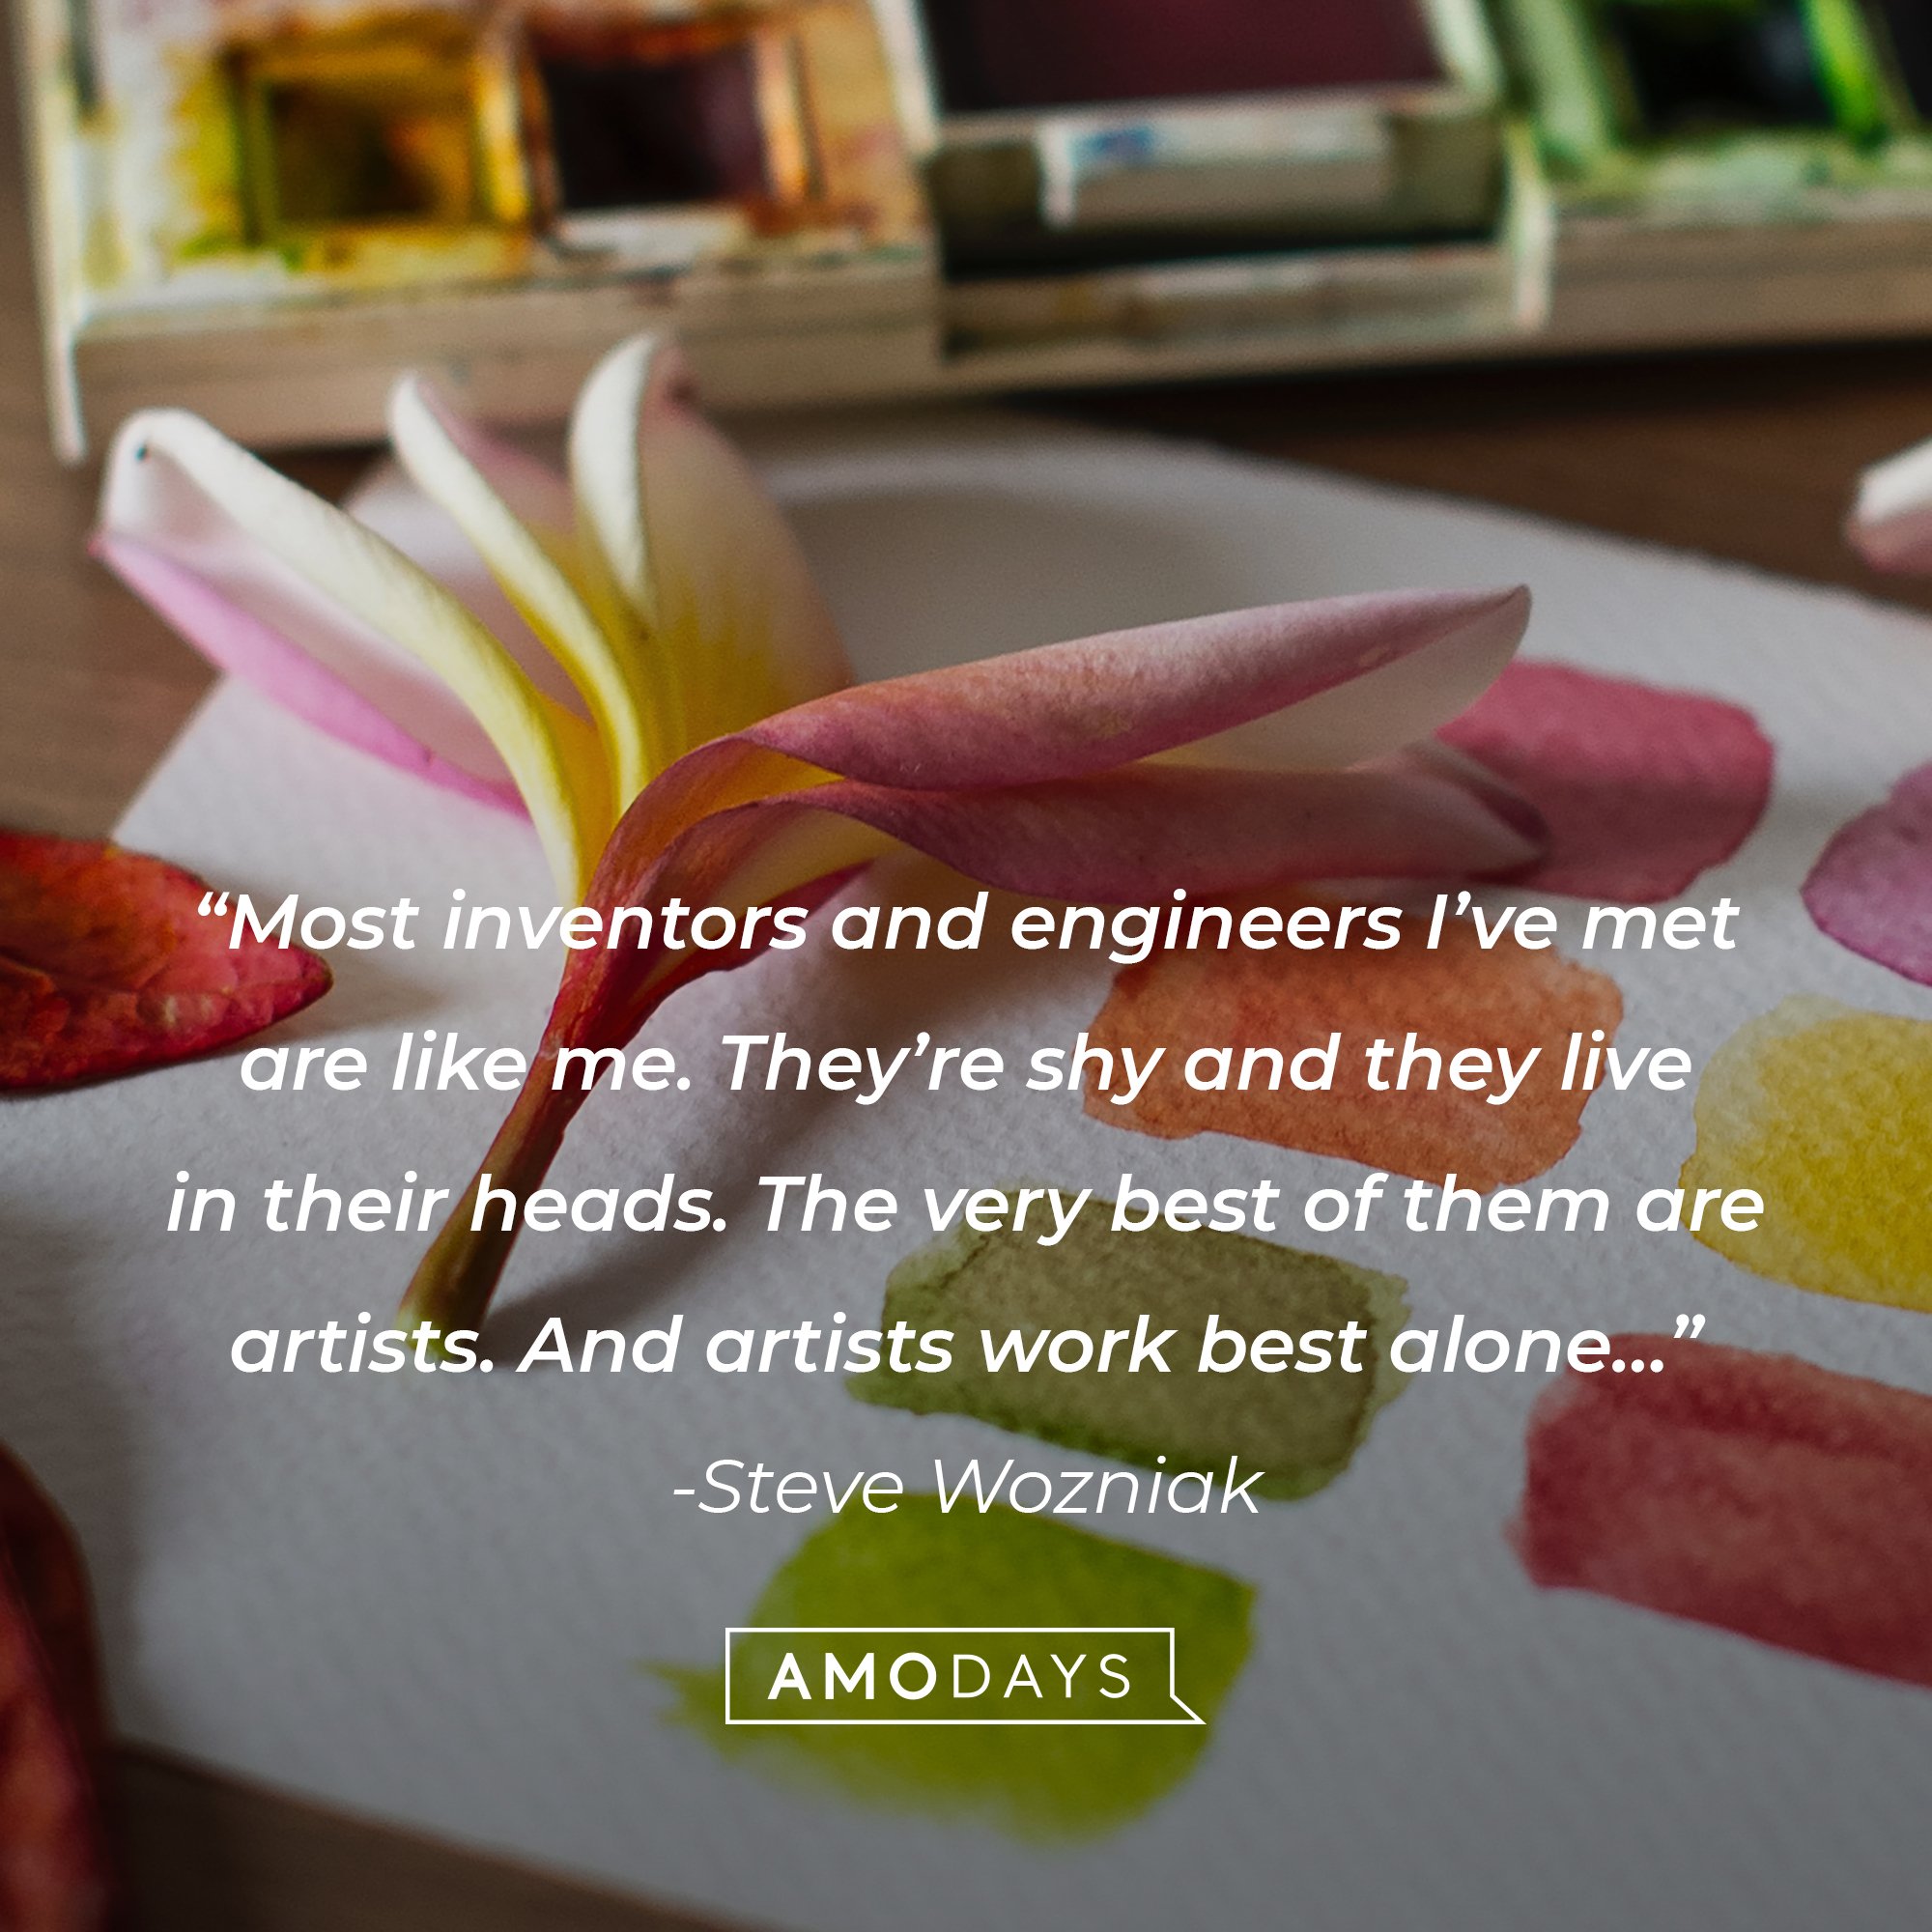 Steve Wozniak's quote: “Most inventors and engineers I’ve met are like me. They’re shy and they live in their heads. The very best of them are artists. And artists work best alone…” | Image: AmoDays